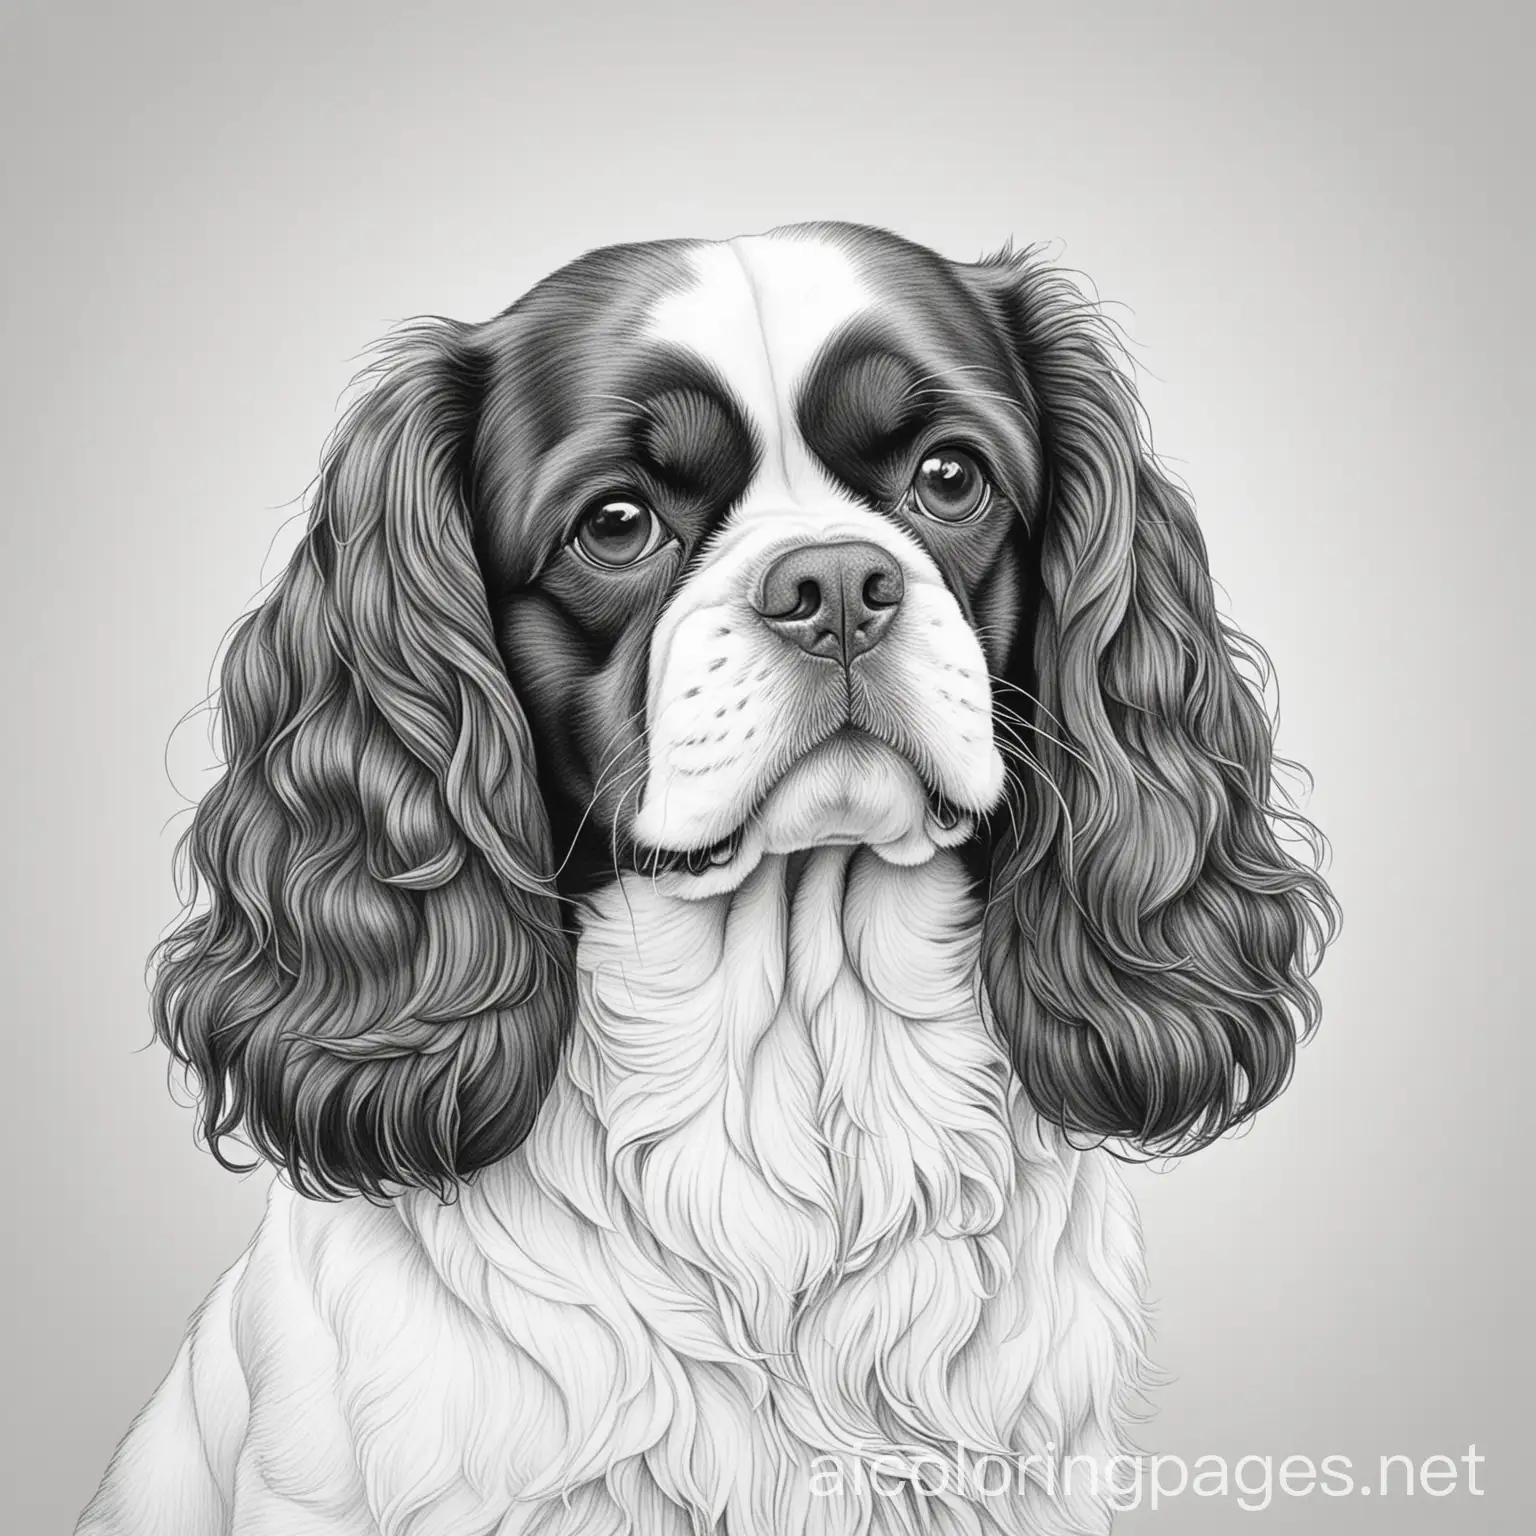 Charles-Spaniel-King-Coloring-Page-Simple-Line-Art-on-White-Background